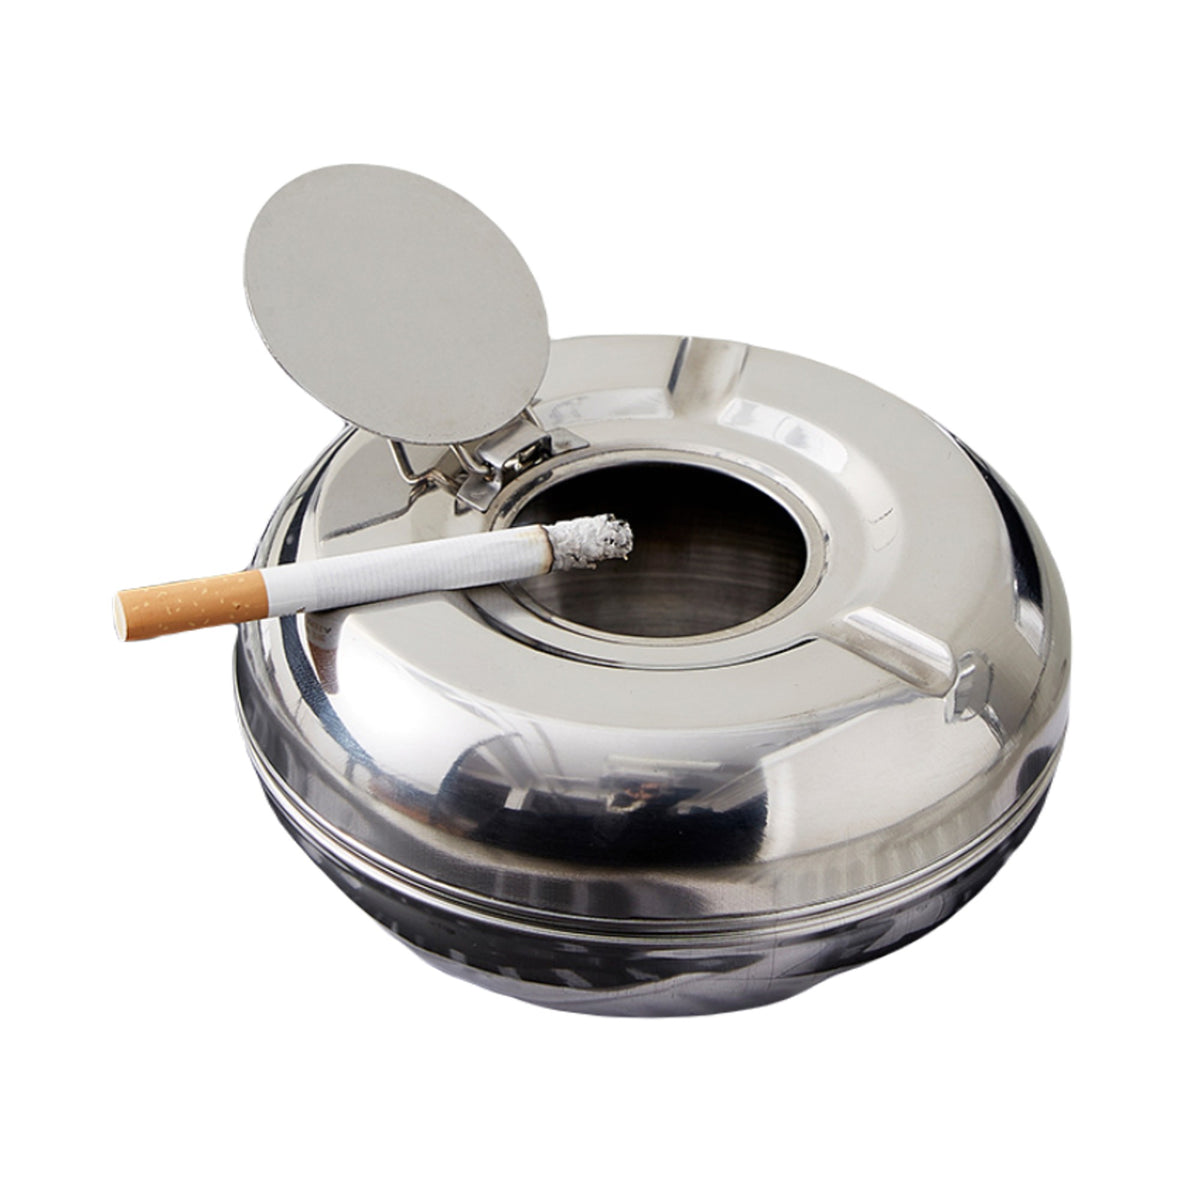 Stainless Steel Modern Tabletop Ashtray With Lid, Cigarette